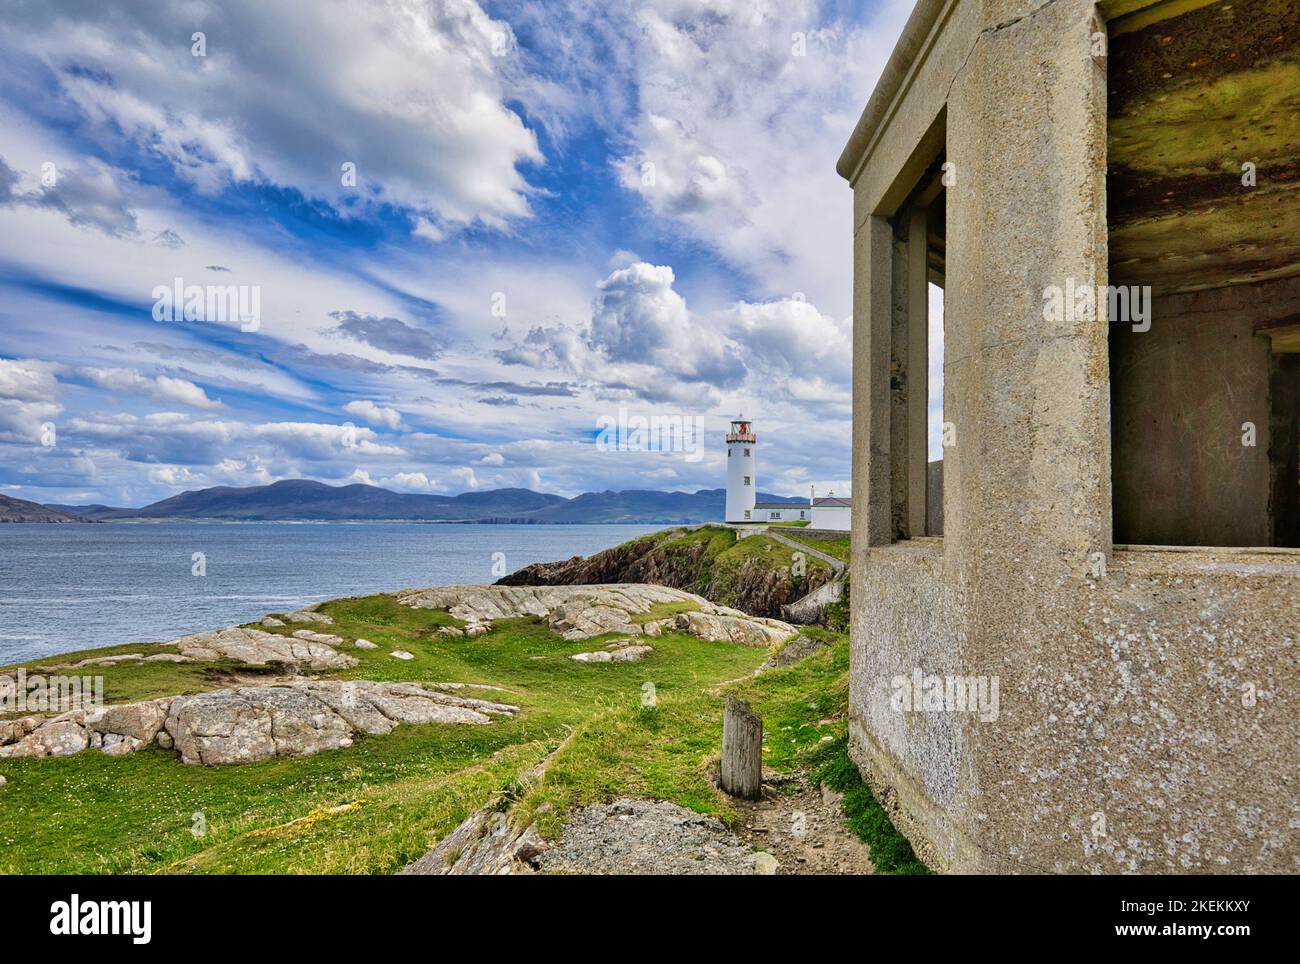 View of Fanad Head Lighthouse with abandoned building in foreground, Fanad Head, Fanad Peninsula, County Donegal, Ireland Stock Photo